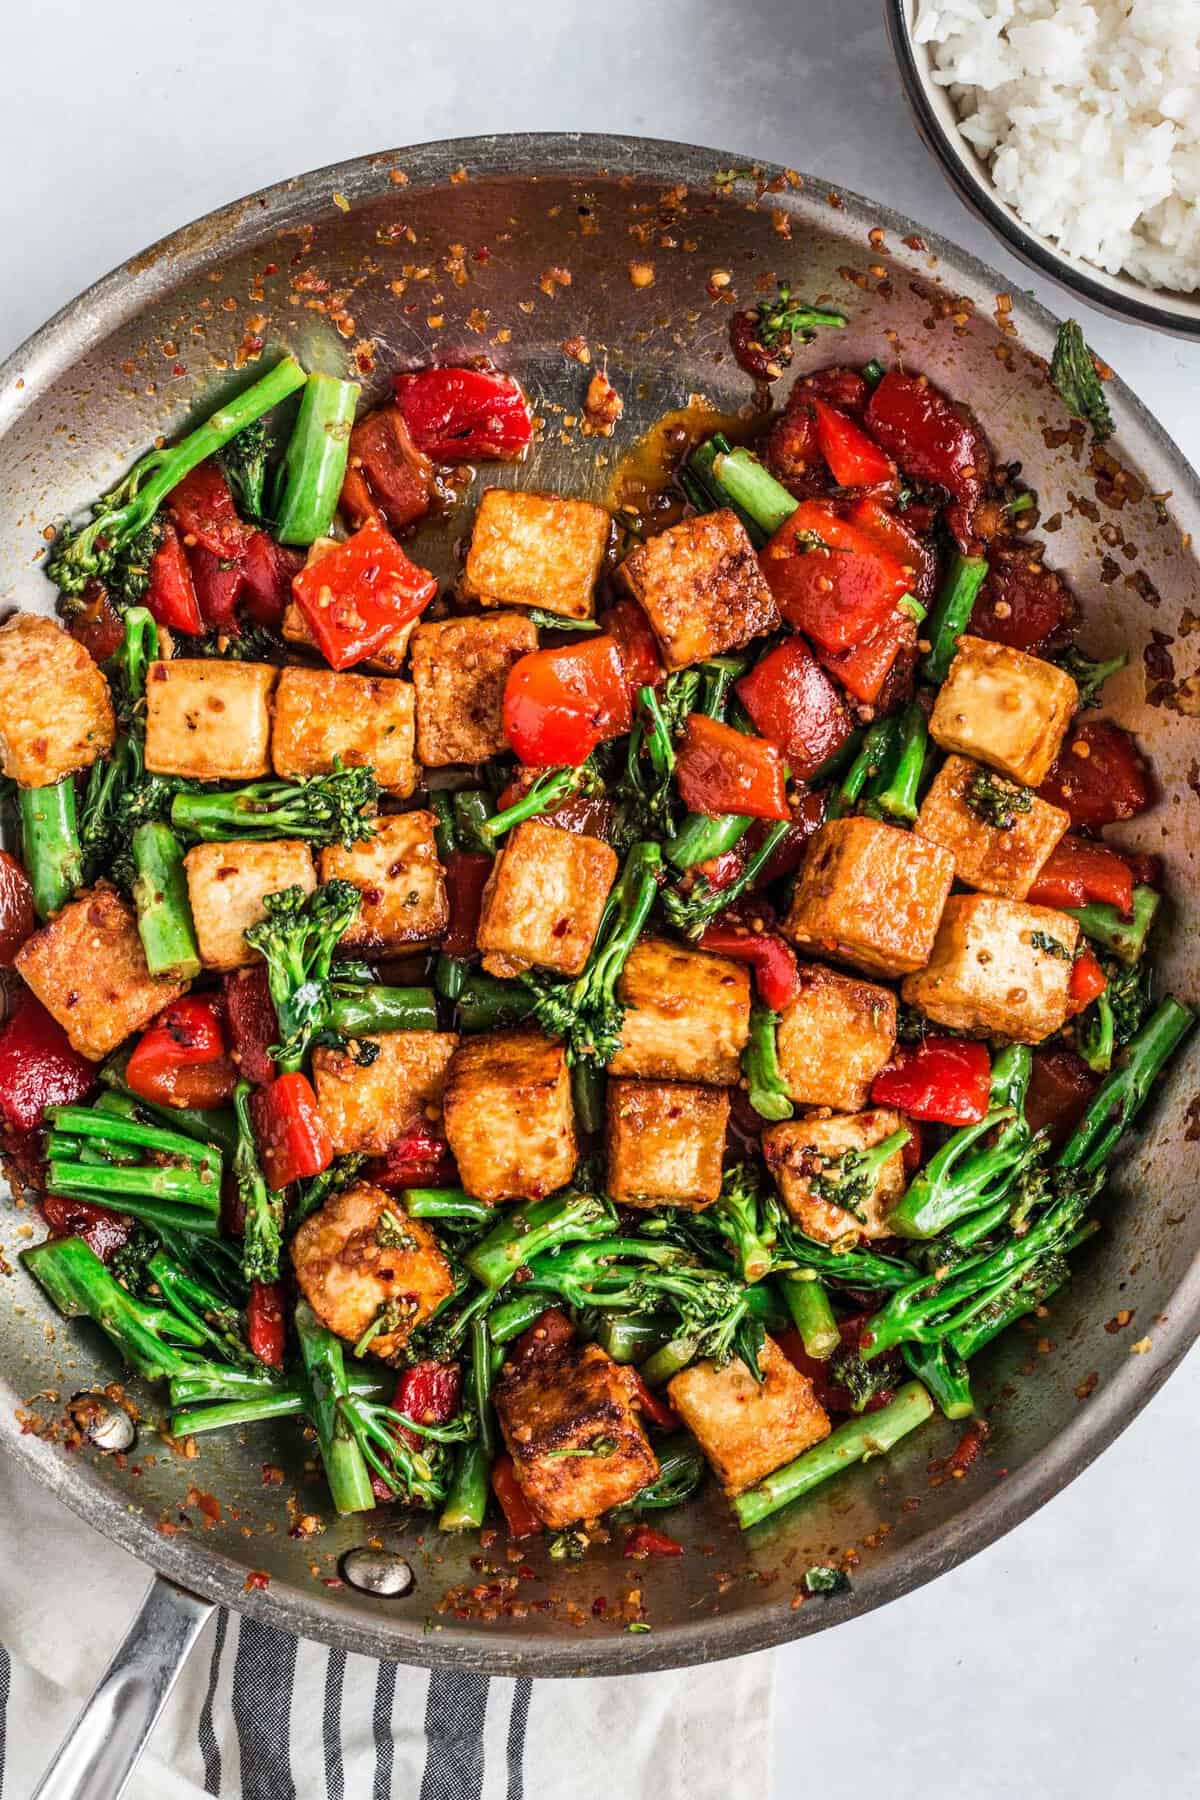 Spicy chili tofu stir fry is being cooked in a large skillet.